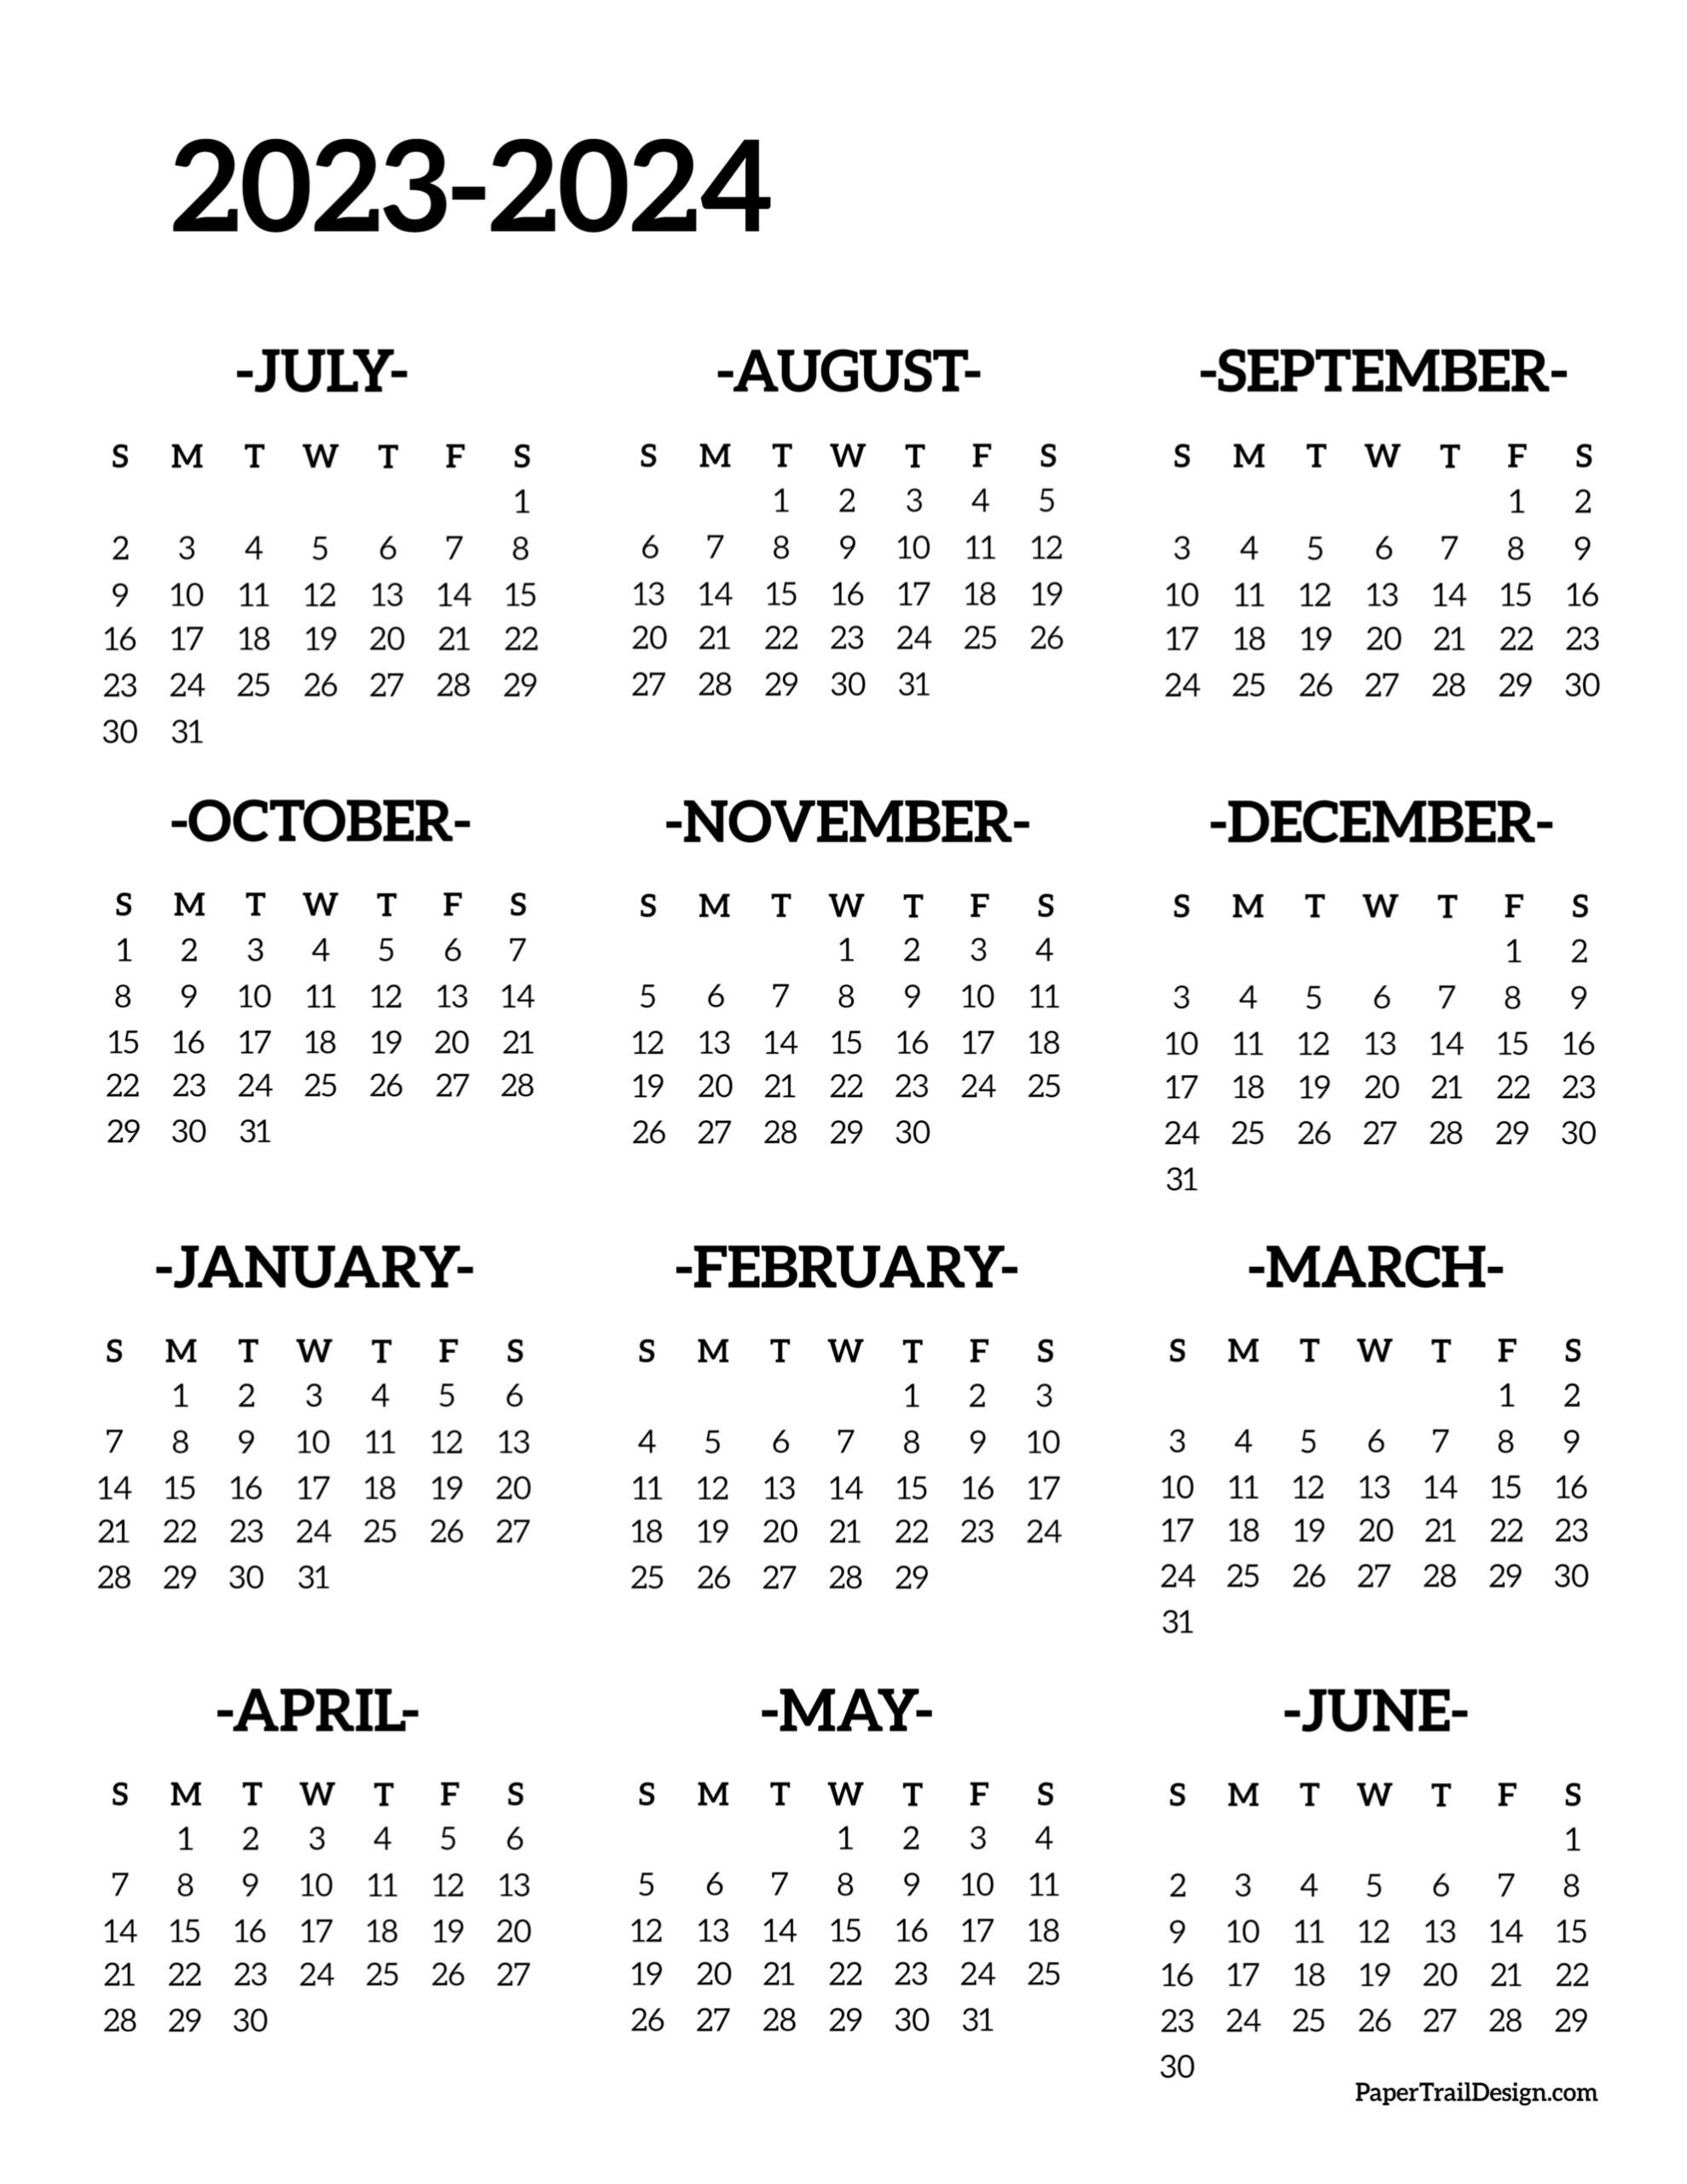 2023-2024 School Year Calendar Free Printable - Paper Trail Design for 2023 And 2024 Monthly Calendar Printable